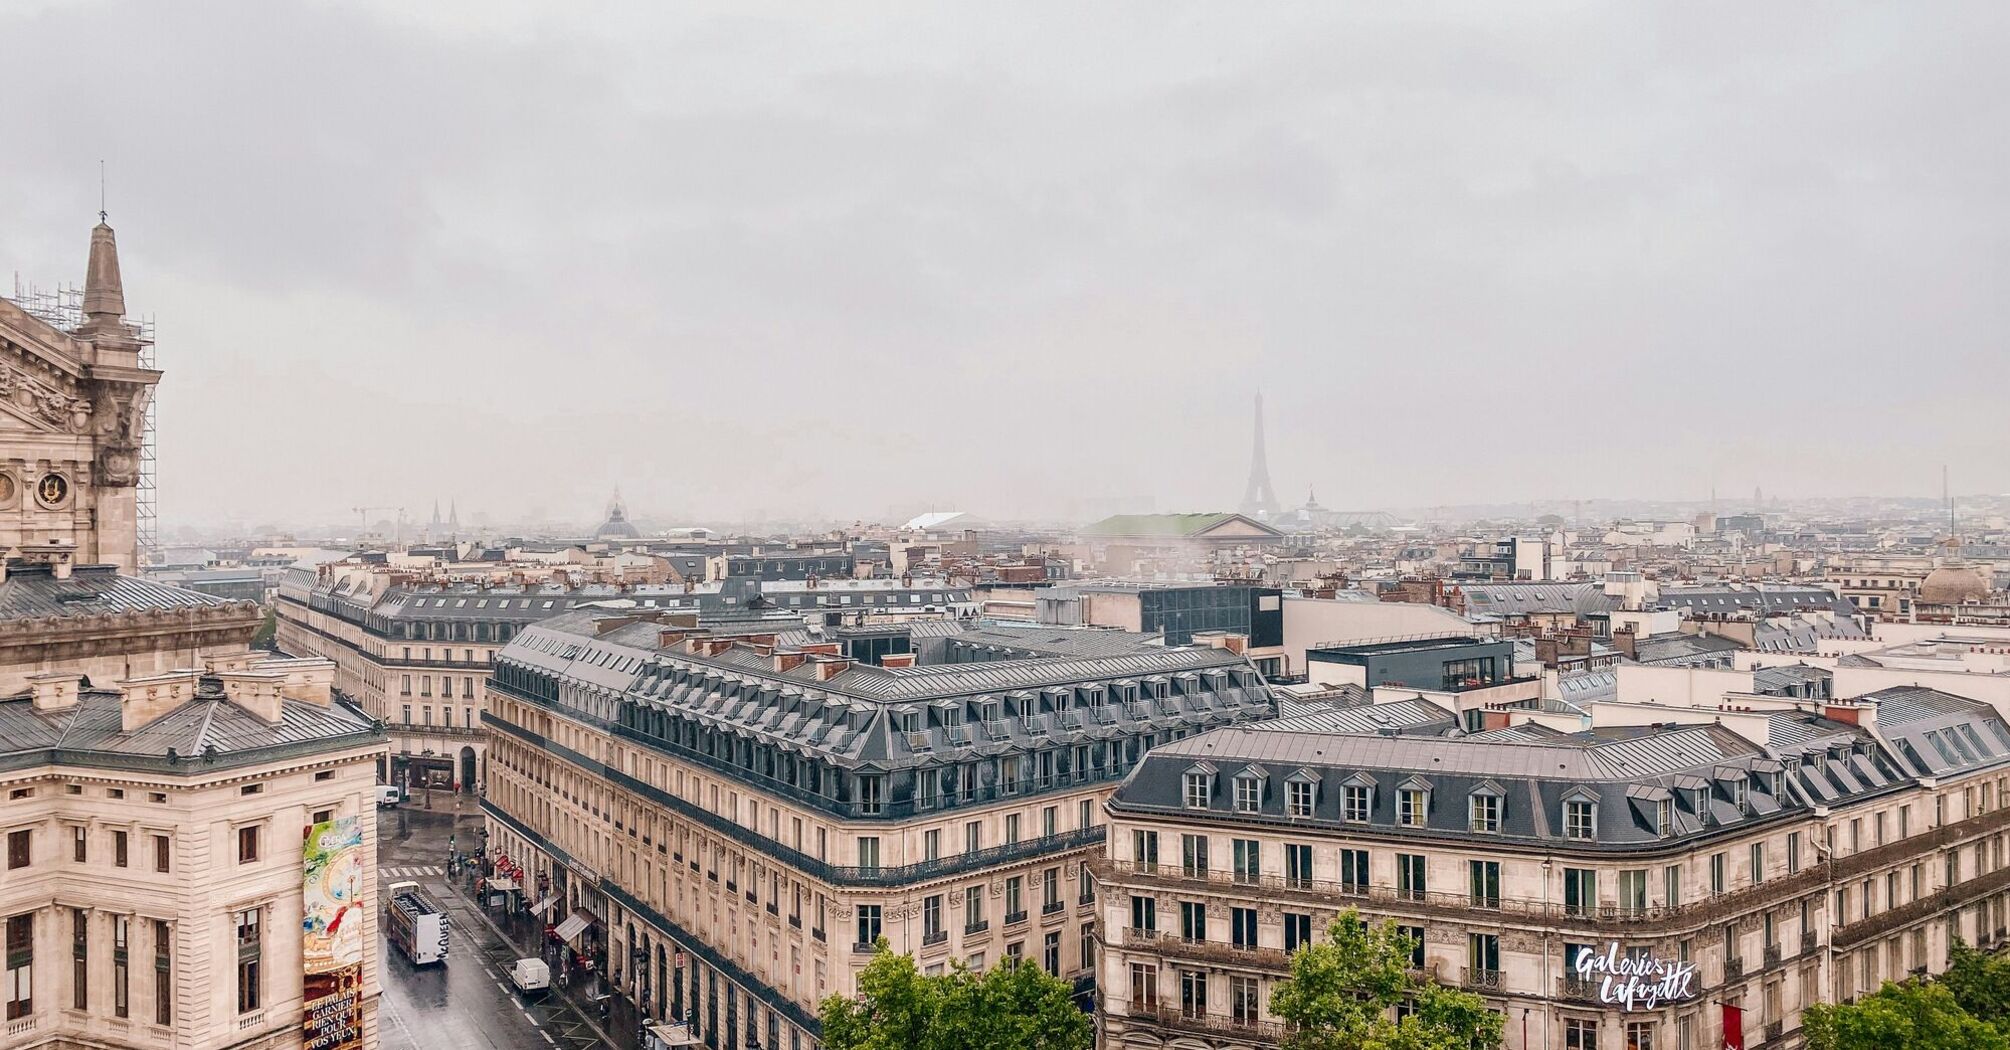 A free viewing platform has been revealed from which you can see the Eiffel Tower, the Arc de Triomphe, and other landmarks of Paris